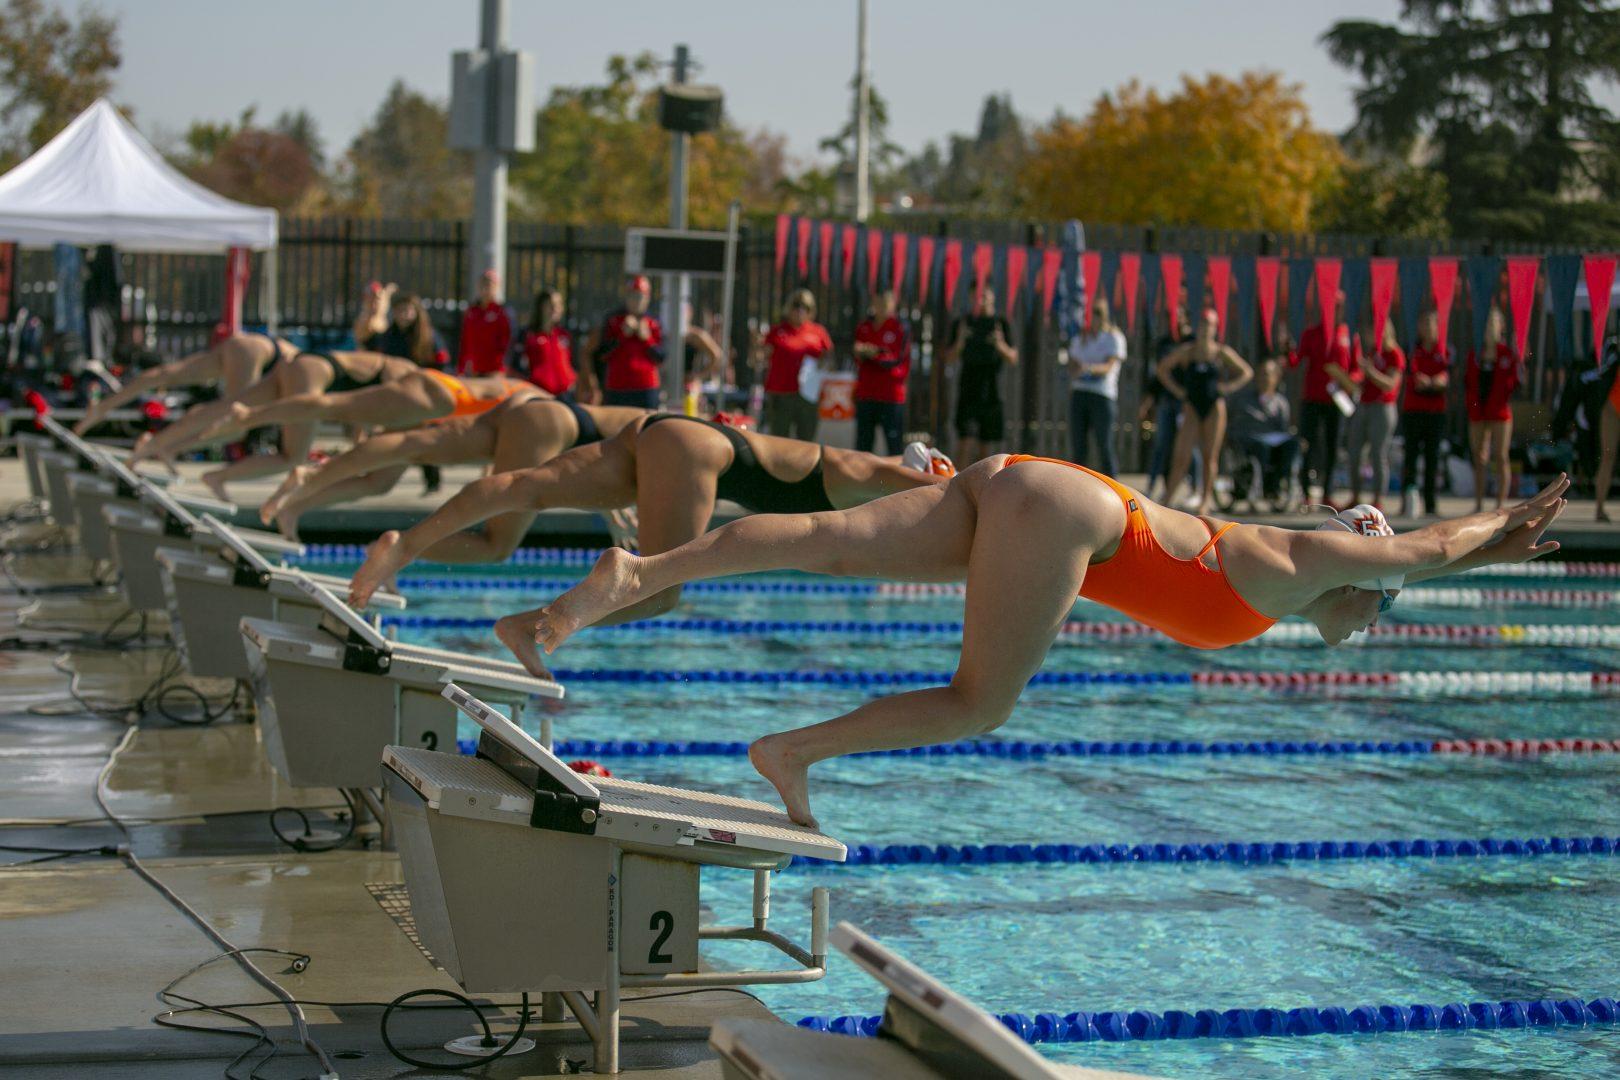 Swimmers dive into the pool during a competition at the Fresno State Aquatic Center on Saturday, Nov. 16 2019.